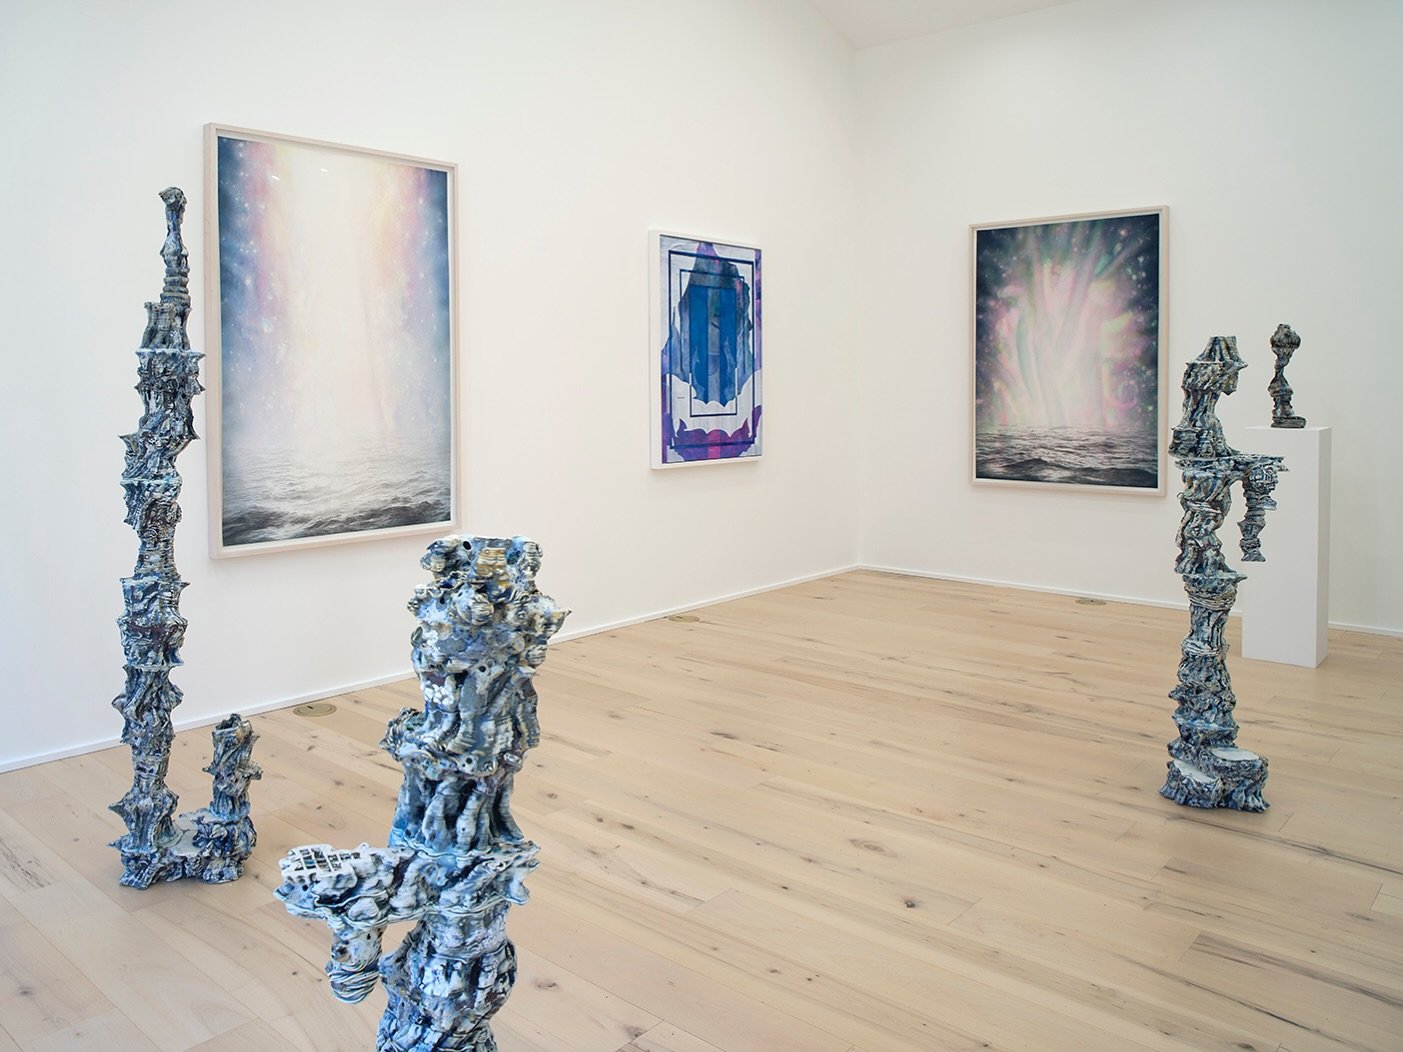 I&rsquo;m telling you &hellip; walking within these works is worth the drive. On view through May 12th. 

When scheduling your visit, please let me know if you&rsquo;d like a cup of coffee or tea, or a glass of wine on the deck.

The title of this ex